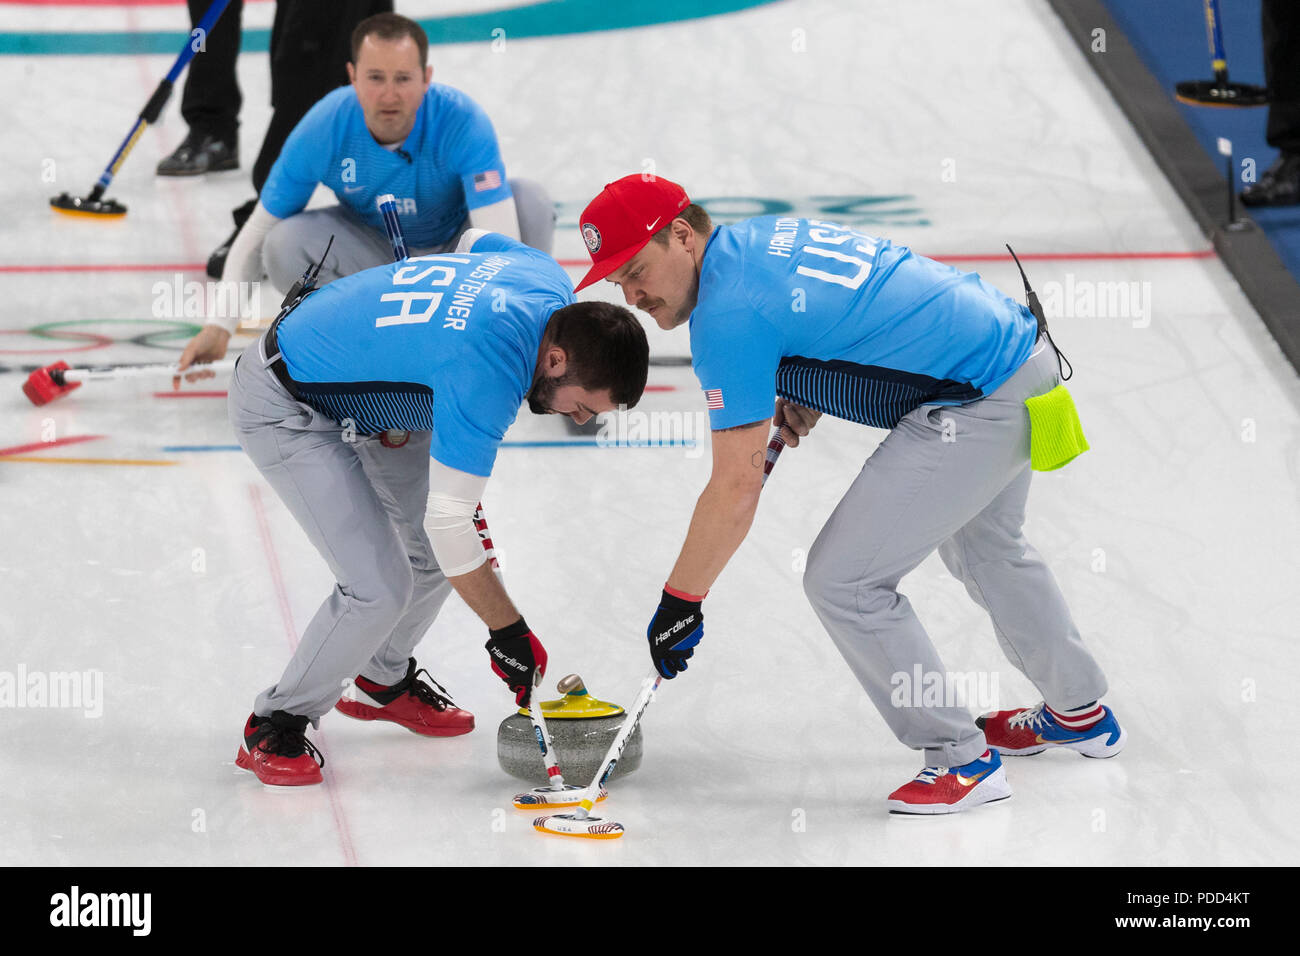 Team USA vs Team Sweden competing in the Curling Gold Medal Game at the Olympic Winter Games PyeongChang 2018 Stock Photo